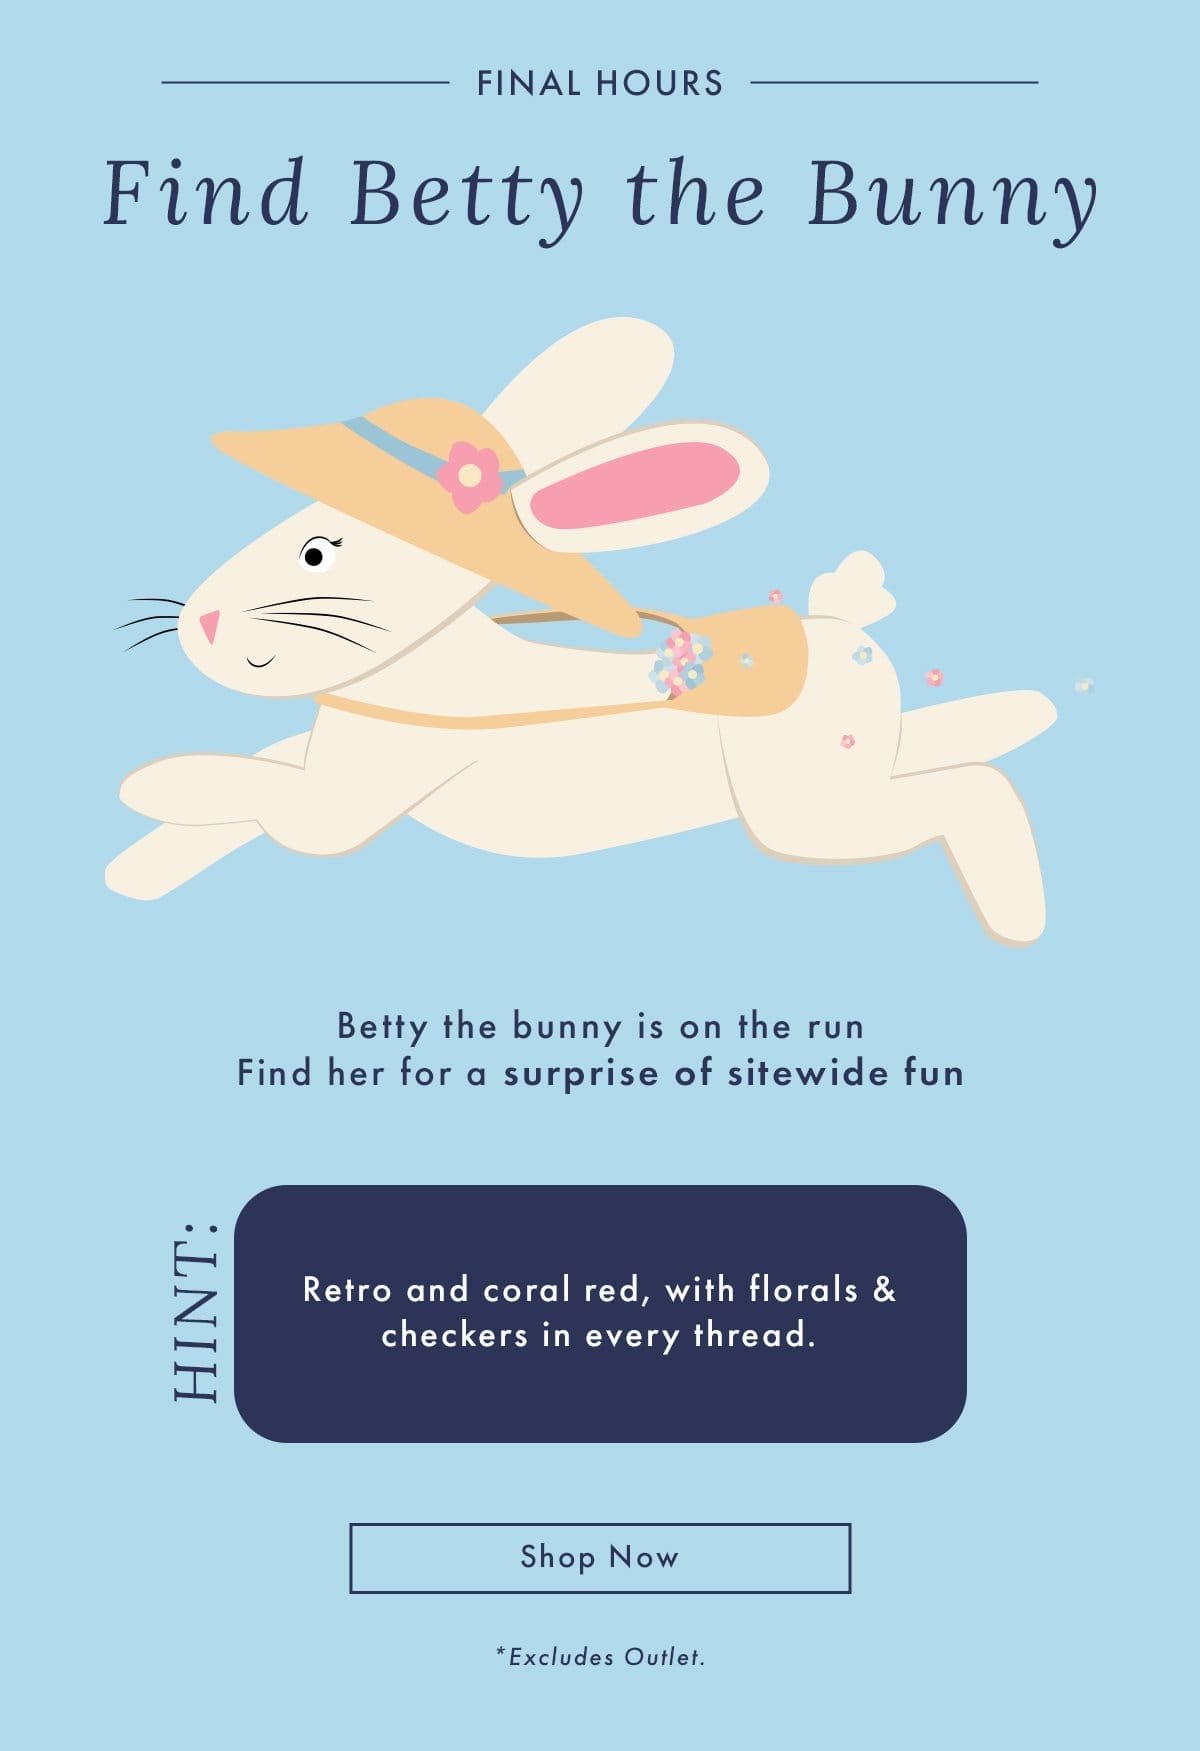 Find Betty the Bunny | Shop Now